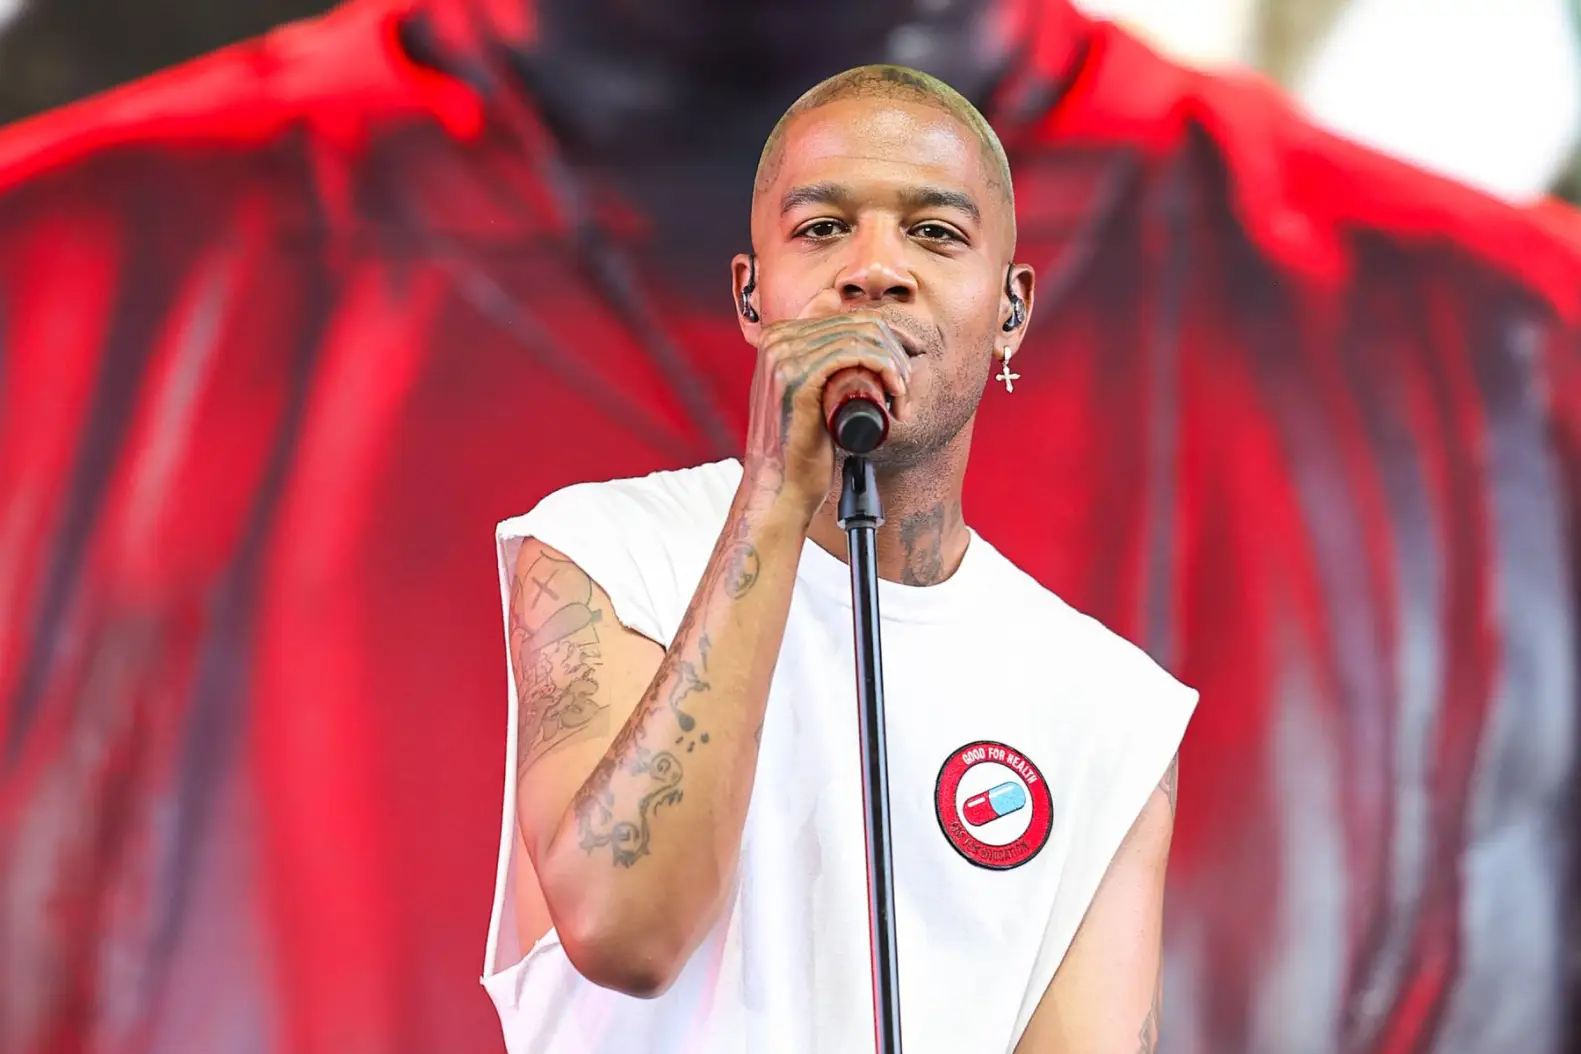 Kid Cudi Breaks Foot After Jumping Off Coachella Stage: ‘Just Leaving the Hospital’